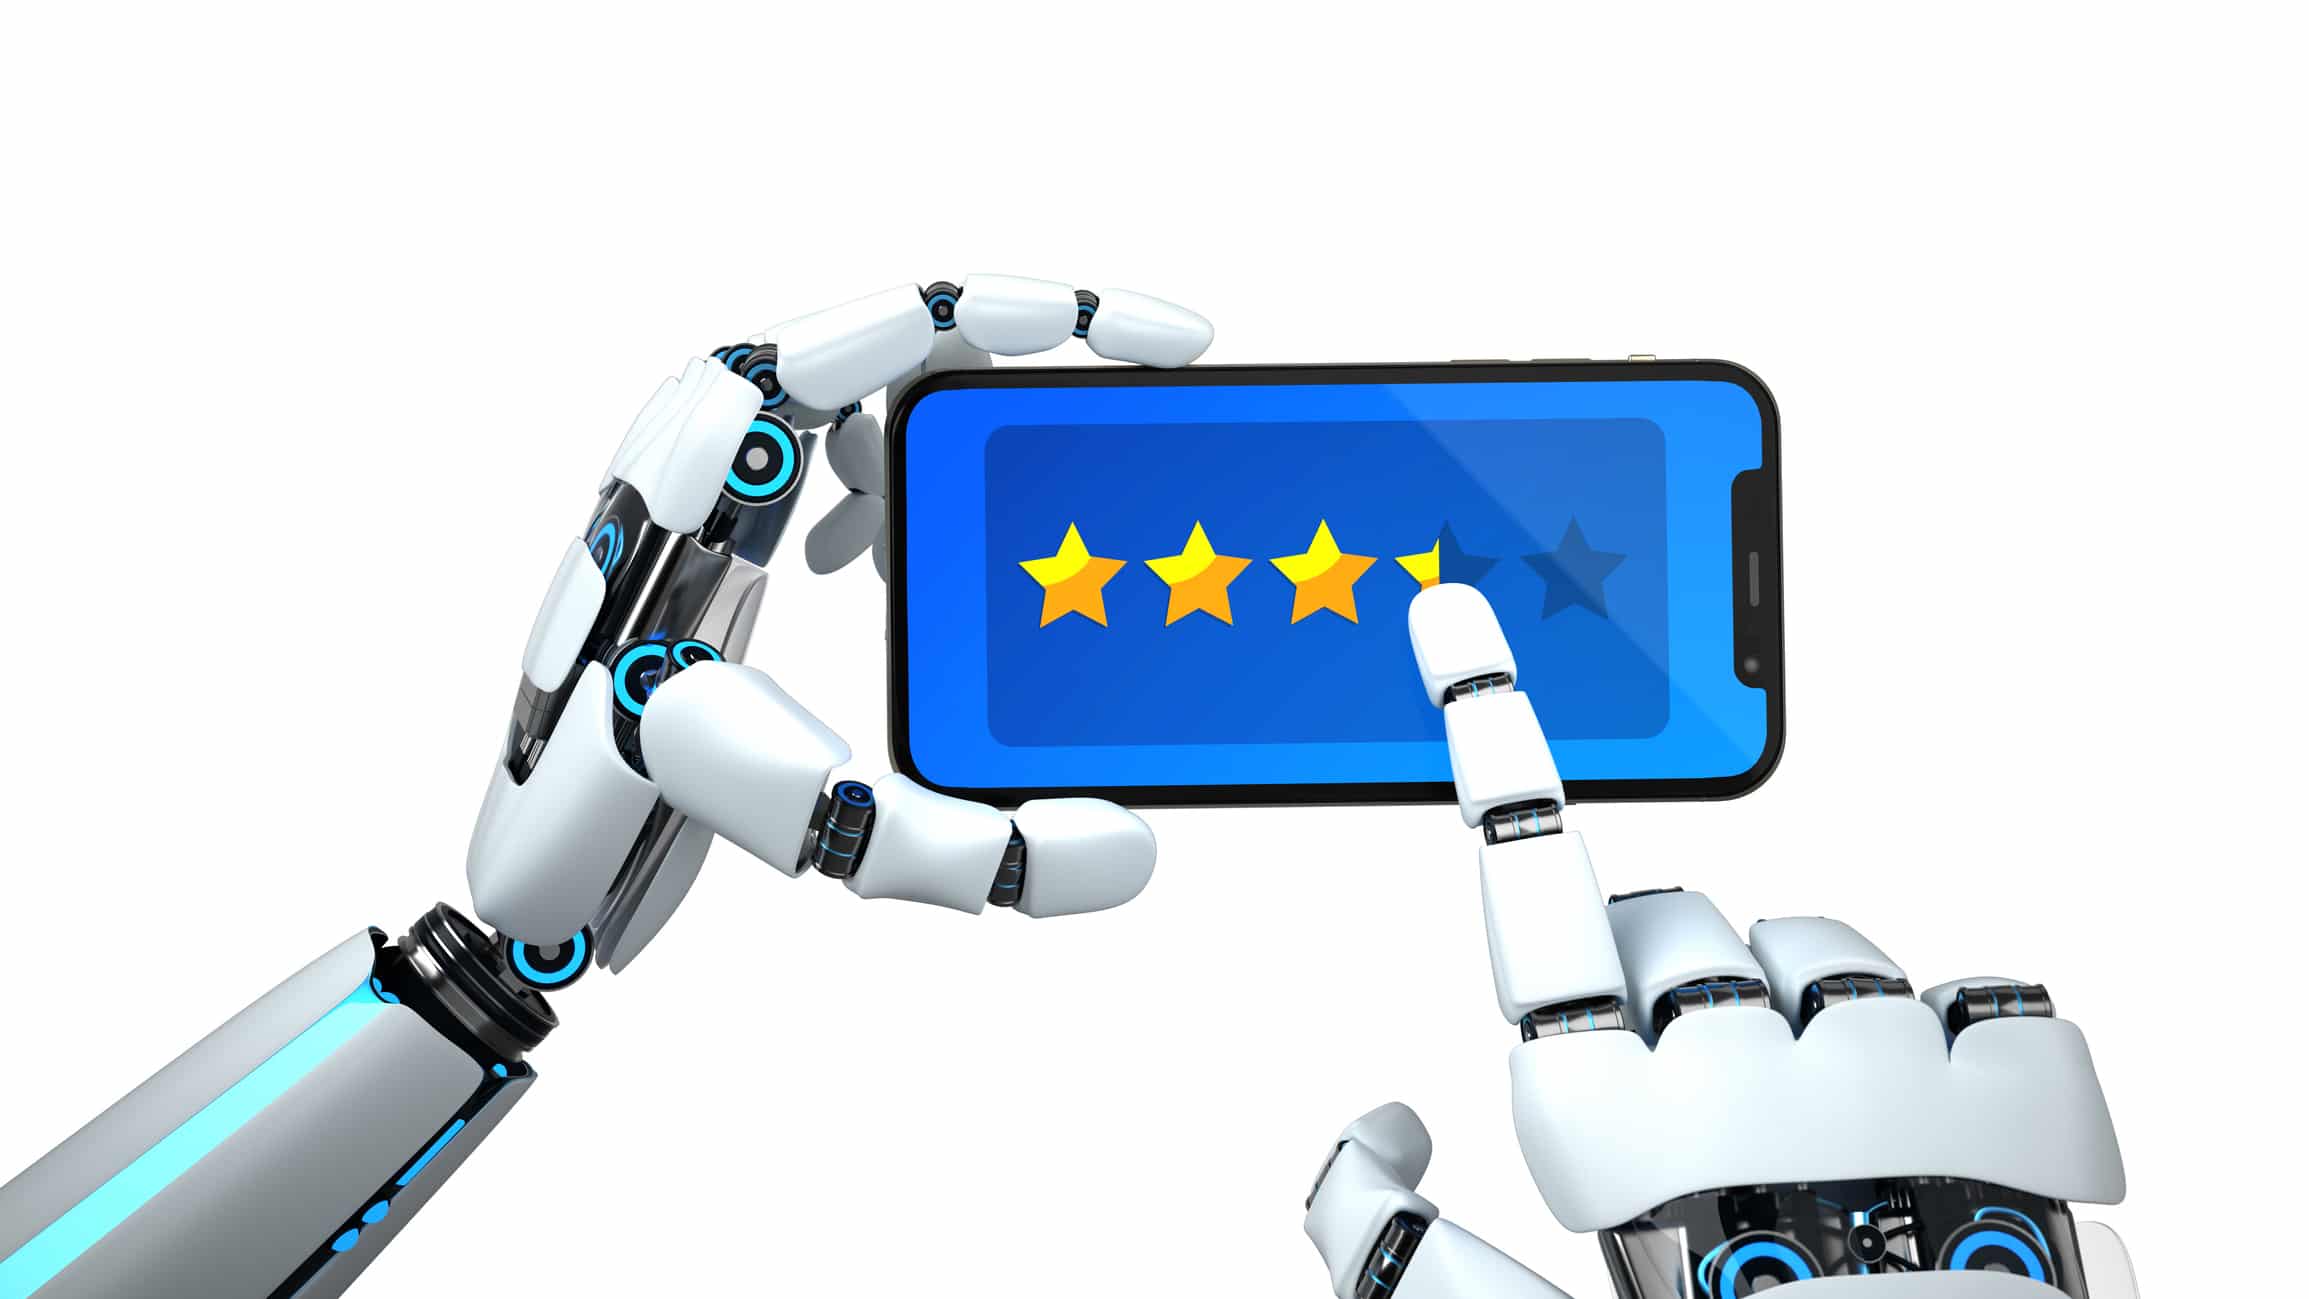 A robot submits a rating to the smartphone